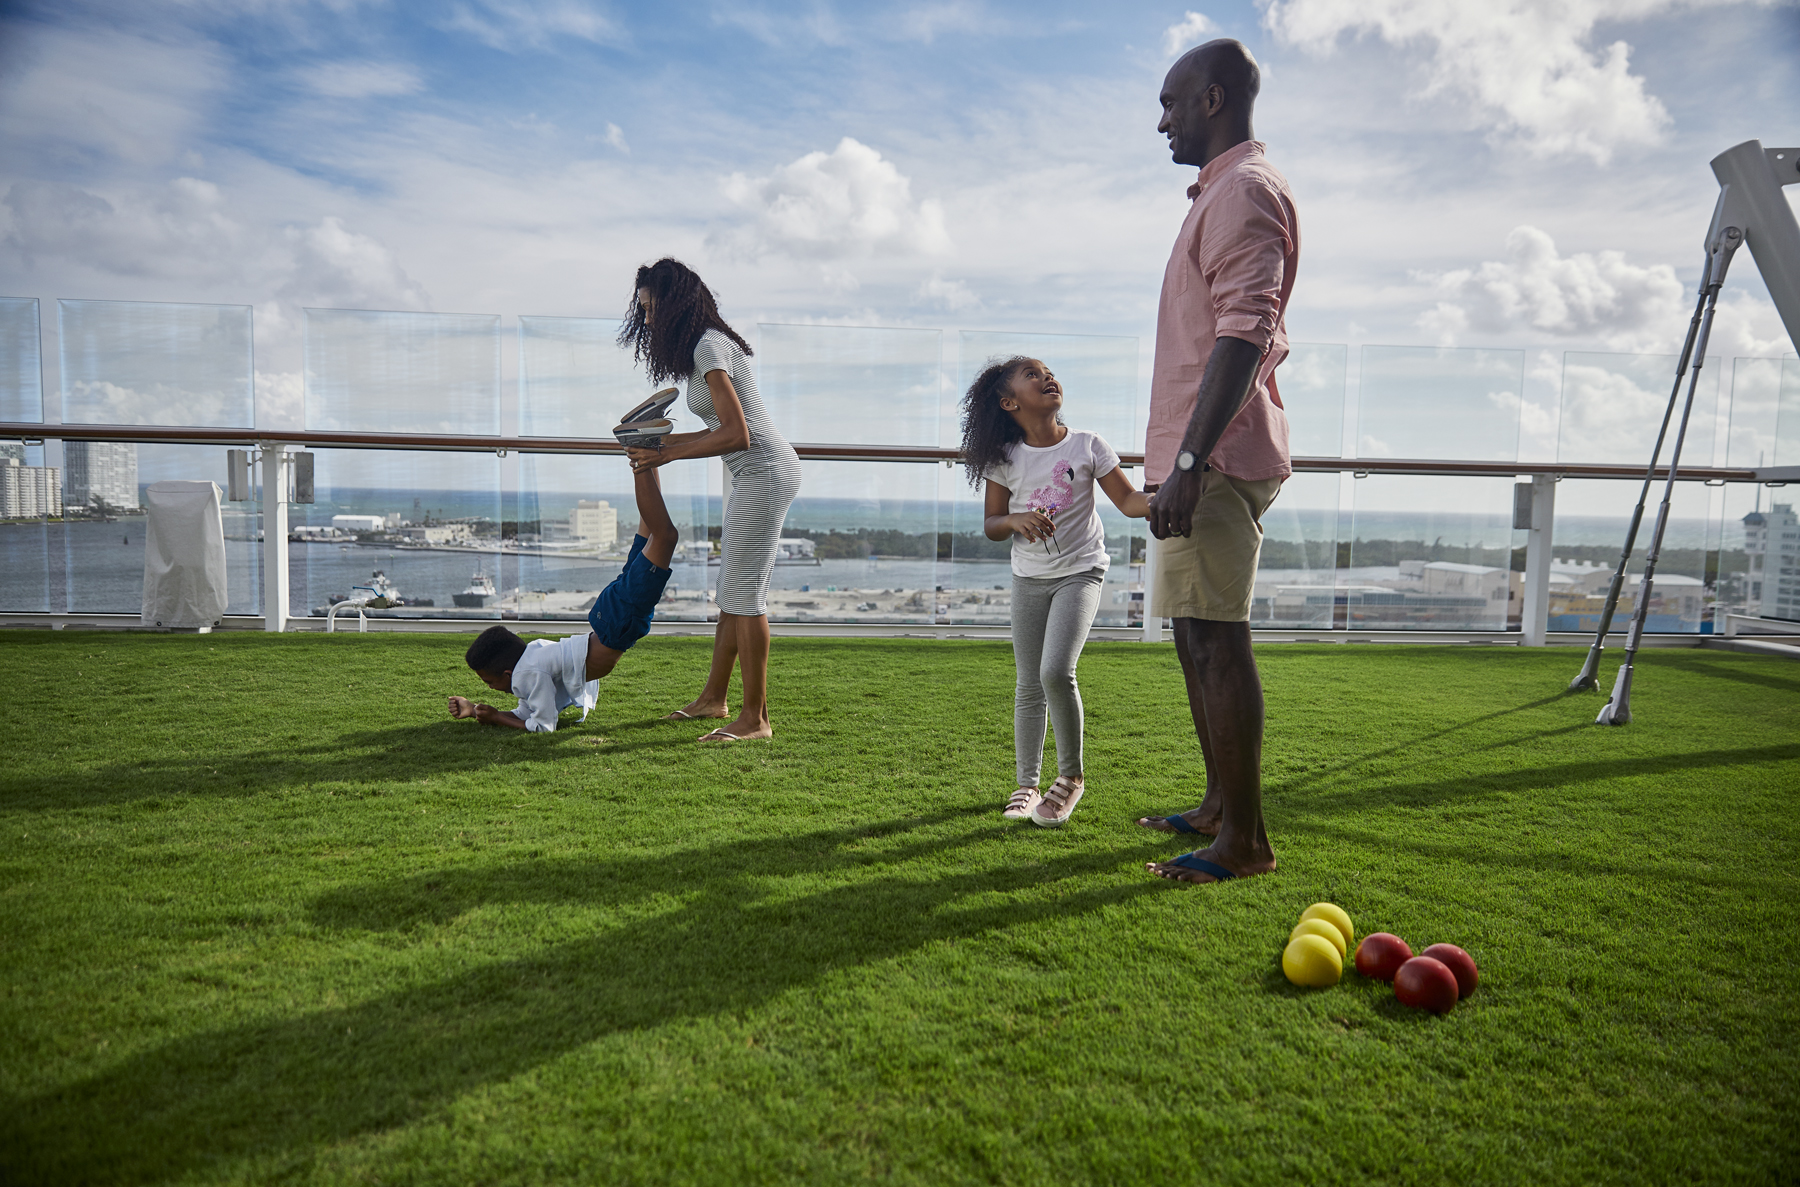 A family plays bocce on the grass at the Lawn Club on a Celebrity cruise ship (source: Celebrity Cruises)